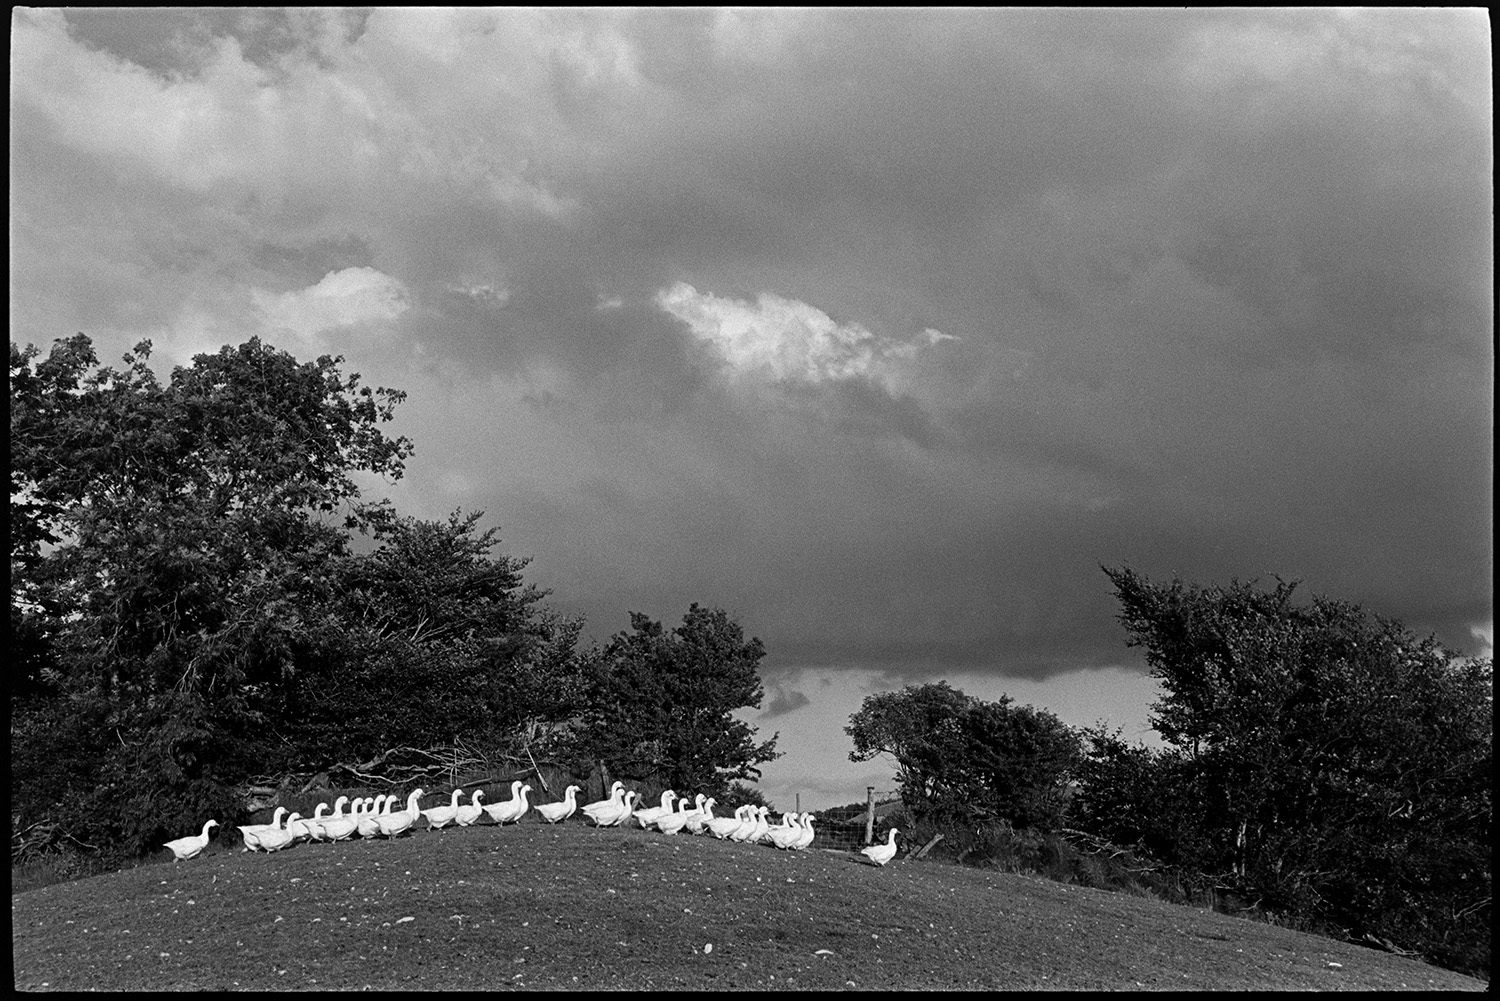 Geese under stormy sky, clouds and  hills.<br />
[A gaggle of geese by a hedge in a field at Indiwell, Swimbridge. Dark storm clouds are in the sky overhead. The geese were a breeding flock which lived on the hill between 1980- 1992, after which they moved to Milborne Port, Dorset where they could often be seen grazing in the fields below the deer park of Sherborne Castle. The eggs were collected for hatching on the farm and goslings were sent out to homes all over the UK. Infertile eggs would sometimes be used by artists for egg decorating.]